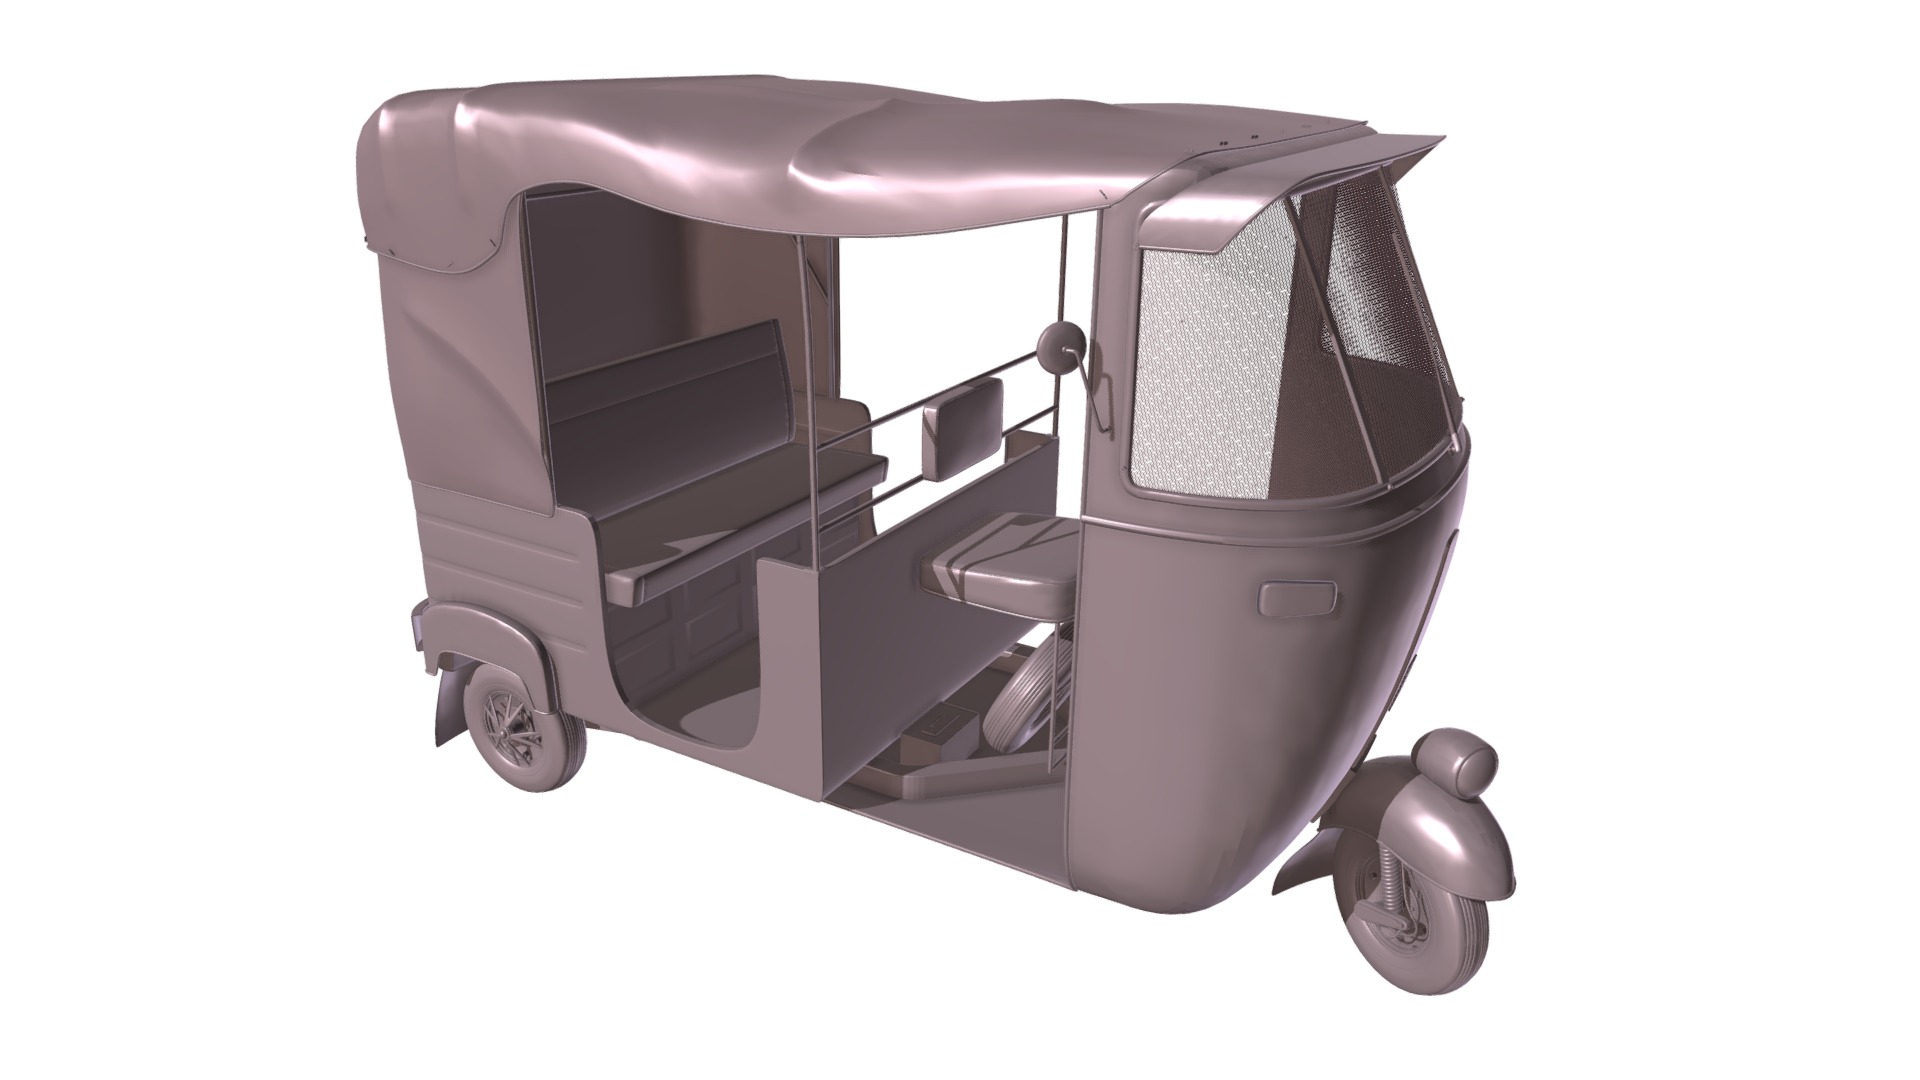 3D model Bajaj Rickshaw Indian Mini Taxi - This is a 3D model of the Bajaj Rickshaw Indian Mini Taxi. The 3D model is about a grey and black shopping cart.